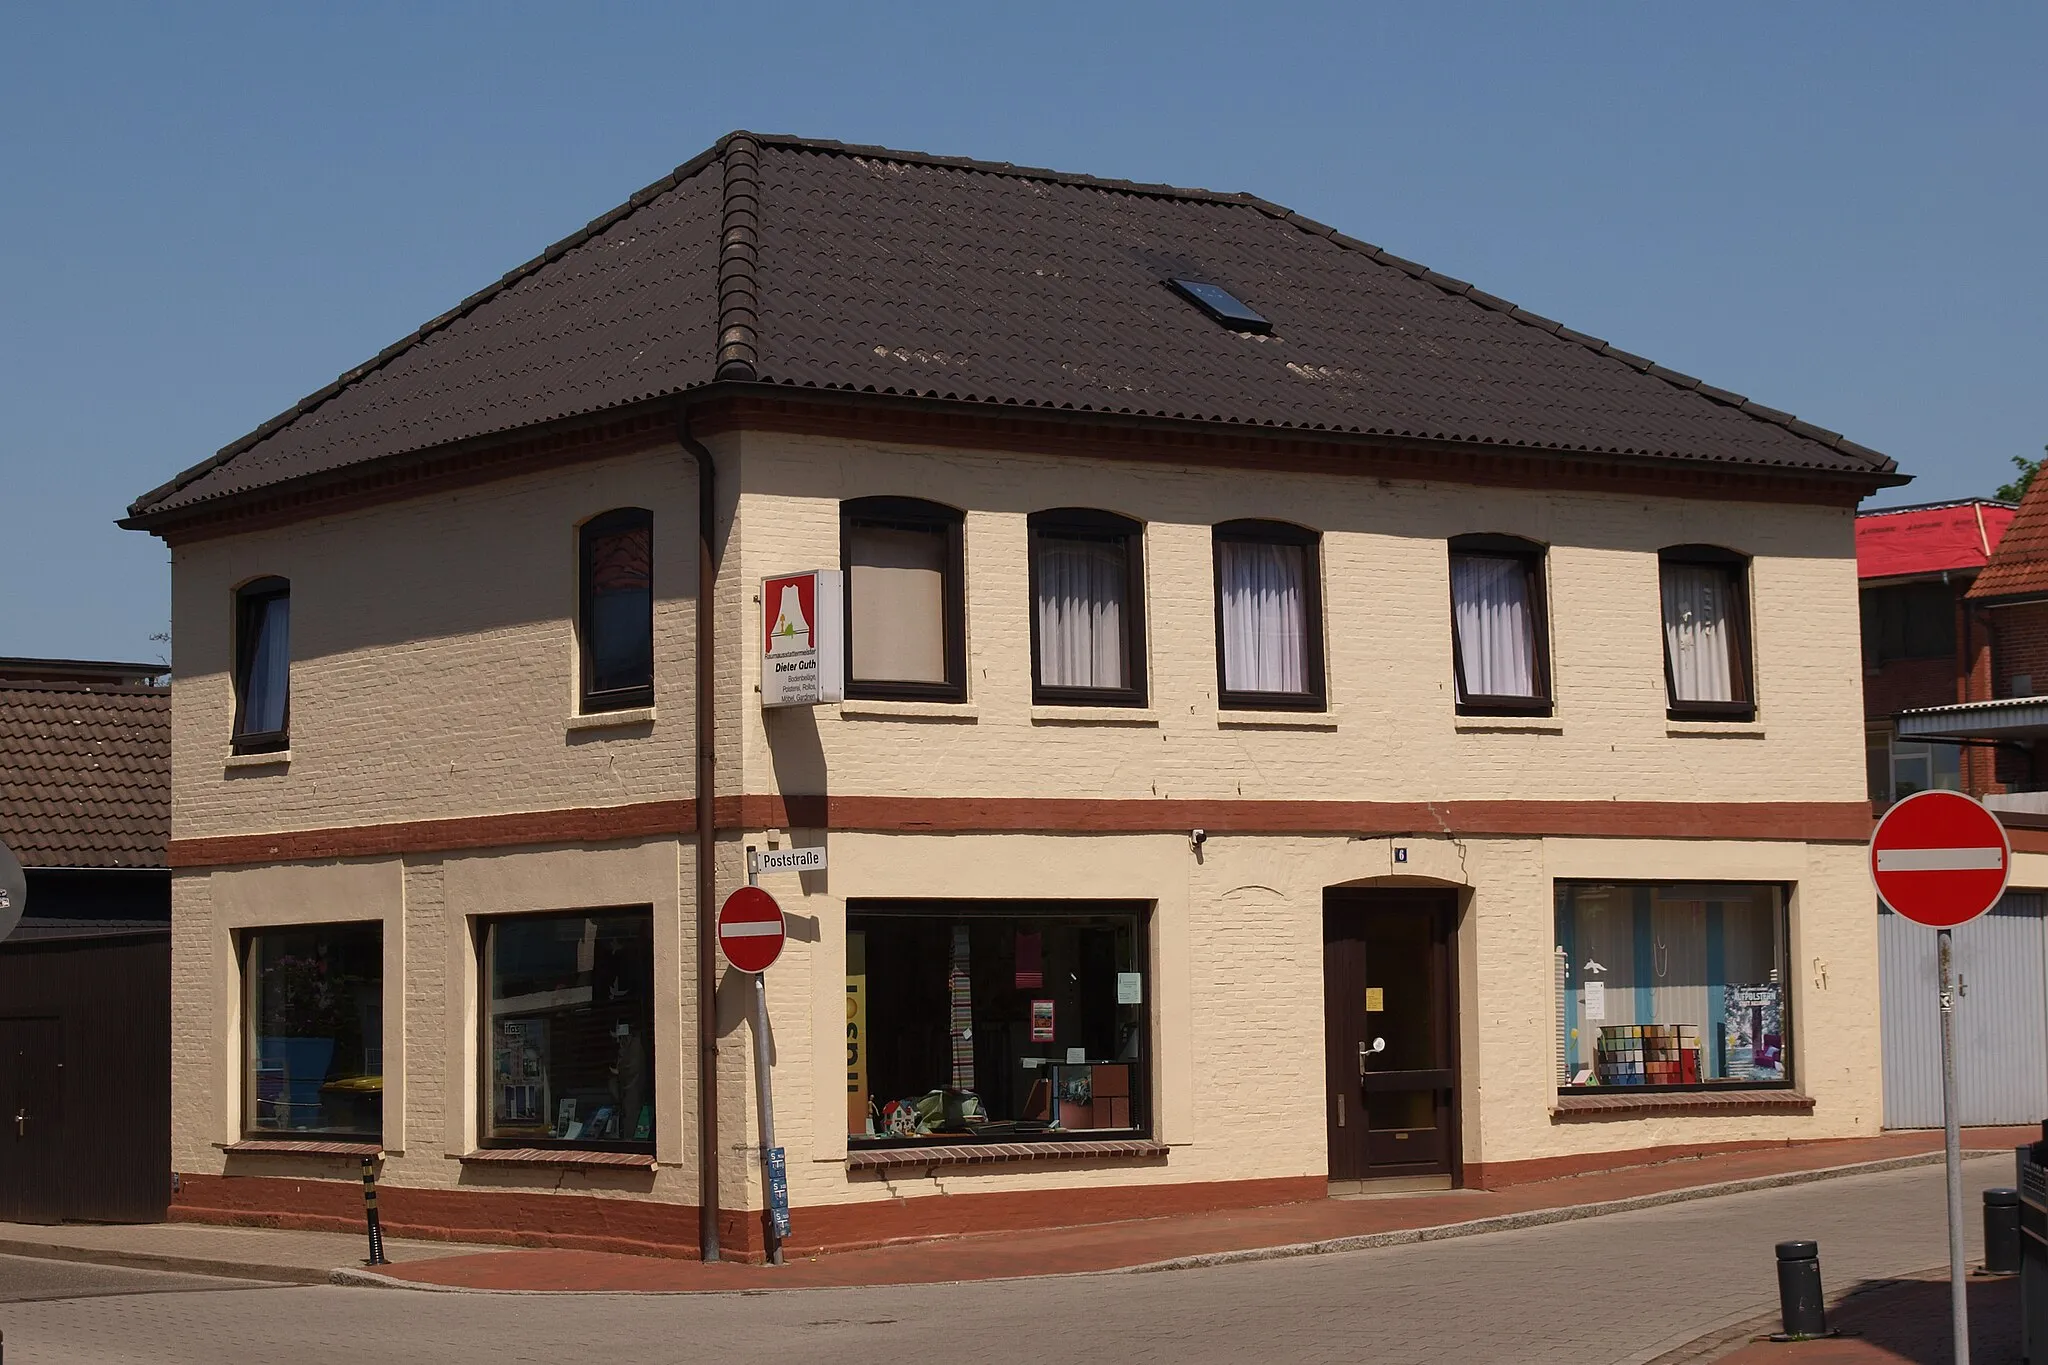 Photo showing: Residential house with shop, Poststraße 6, Rellingen (Kreis Pinneberg), Germany. Cultural heritiage monument.